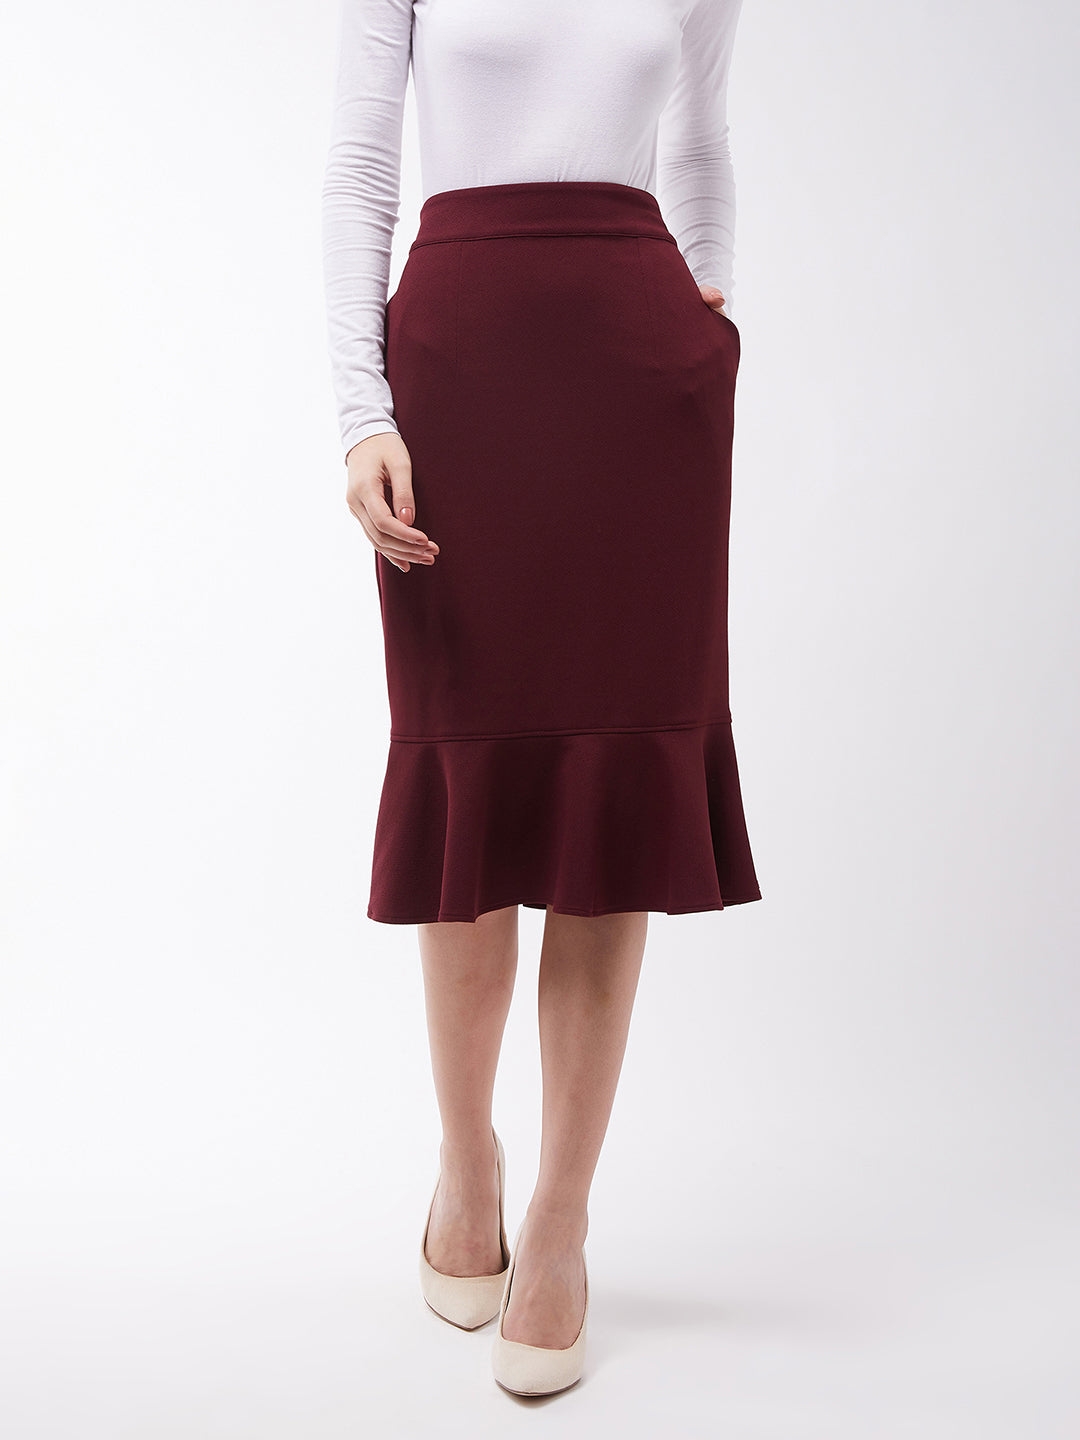 MISS CHASE | Women's Red  Flared Skirt